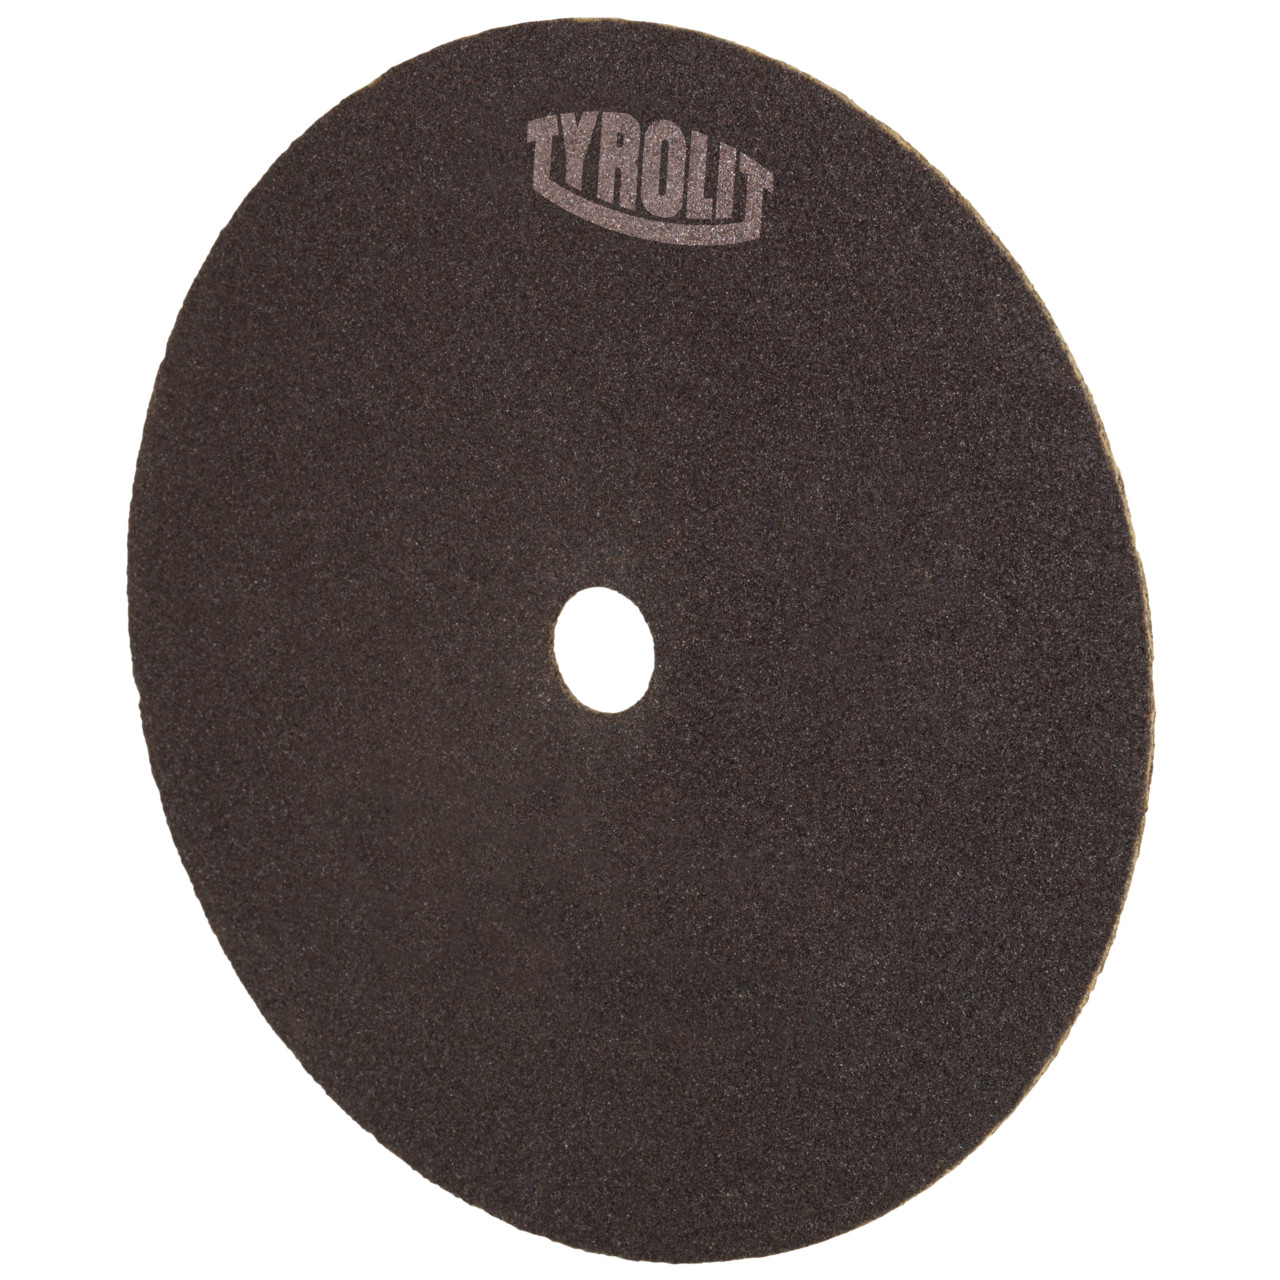 TYROLIT cut-off wheel for cutting and saw sharpening DxDxH 250x1.6x32 For steel and HSS, shape: 41N - straight version (non-woven cut-off wheel), Art. 834839